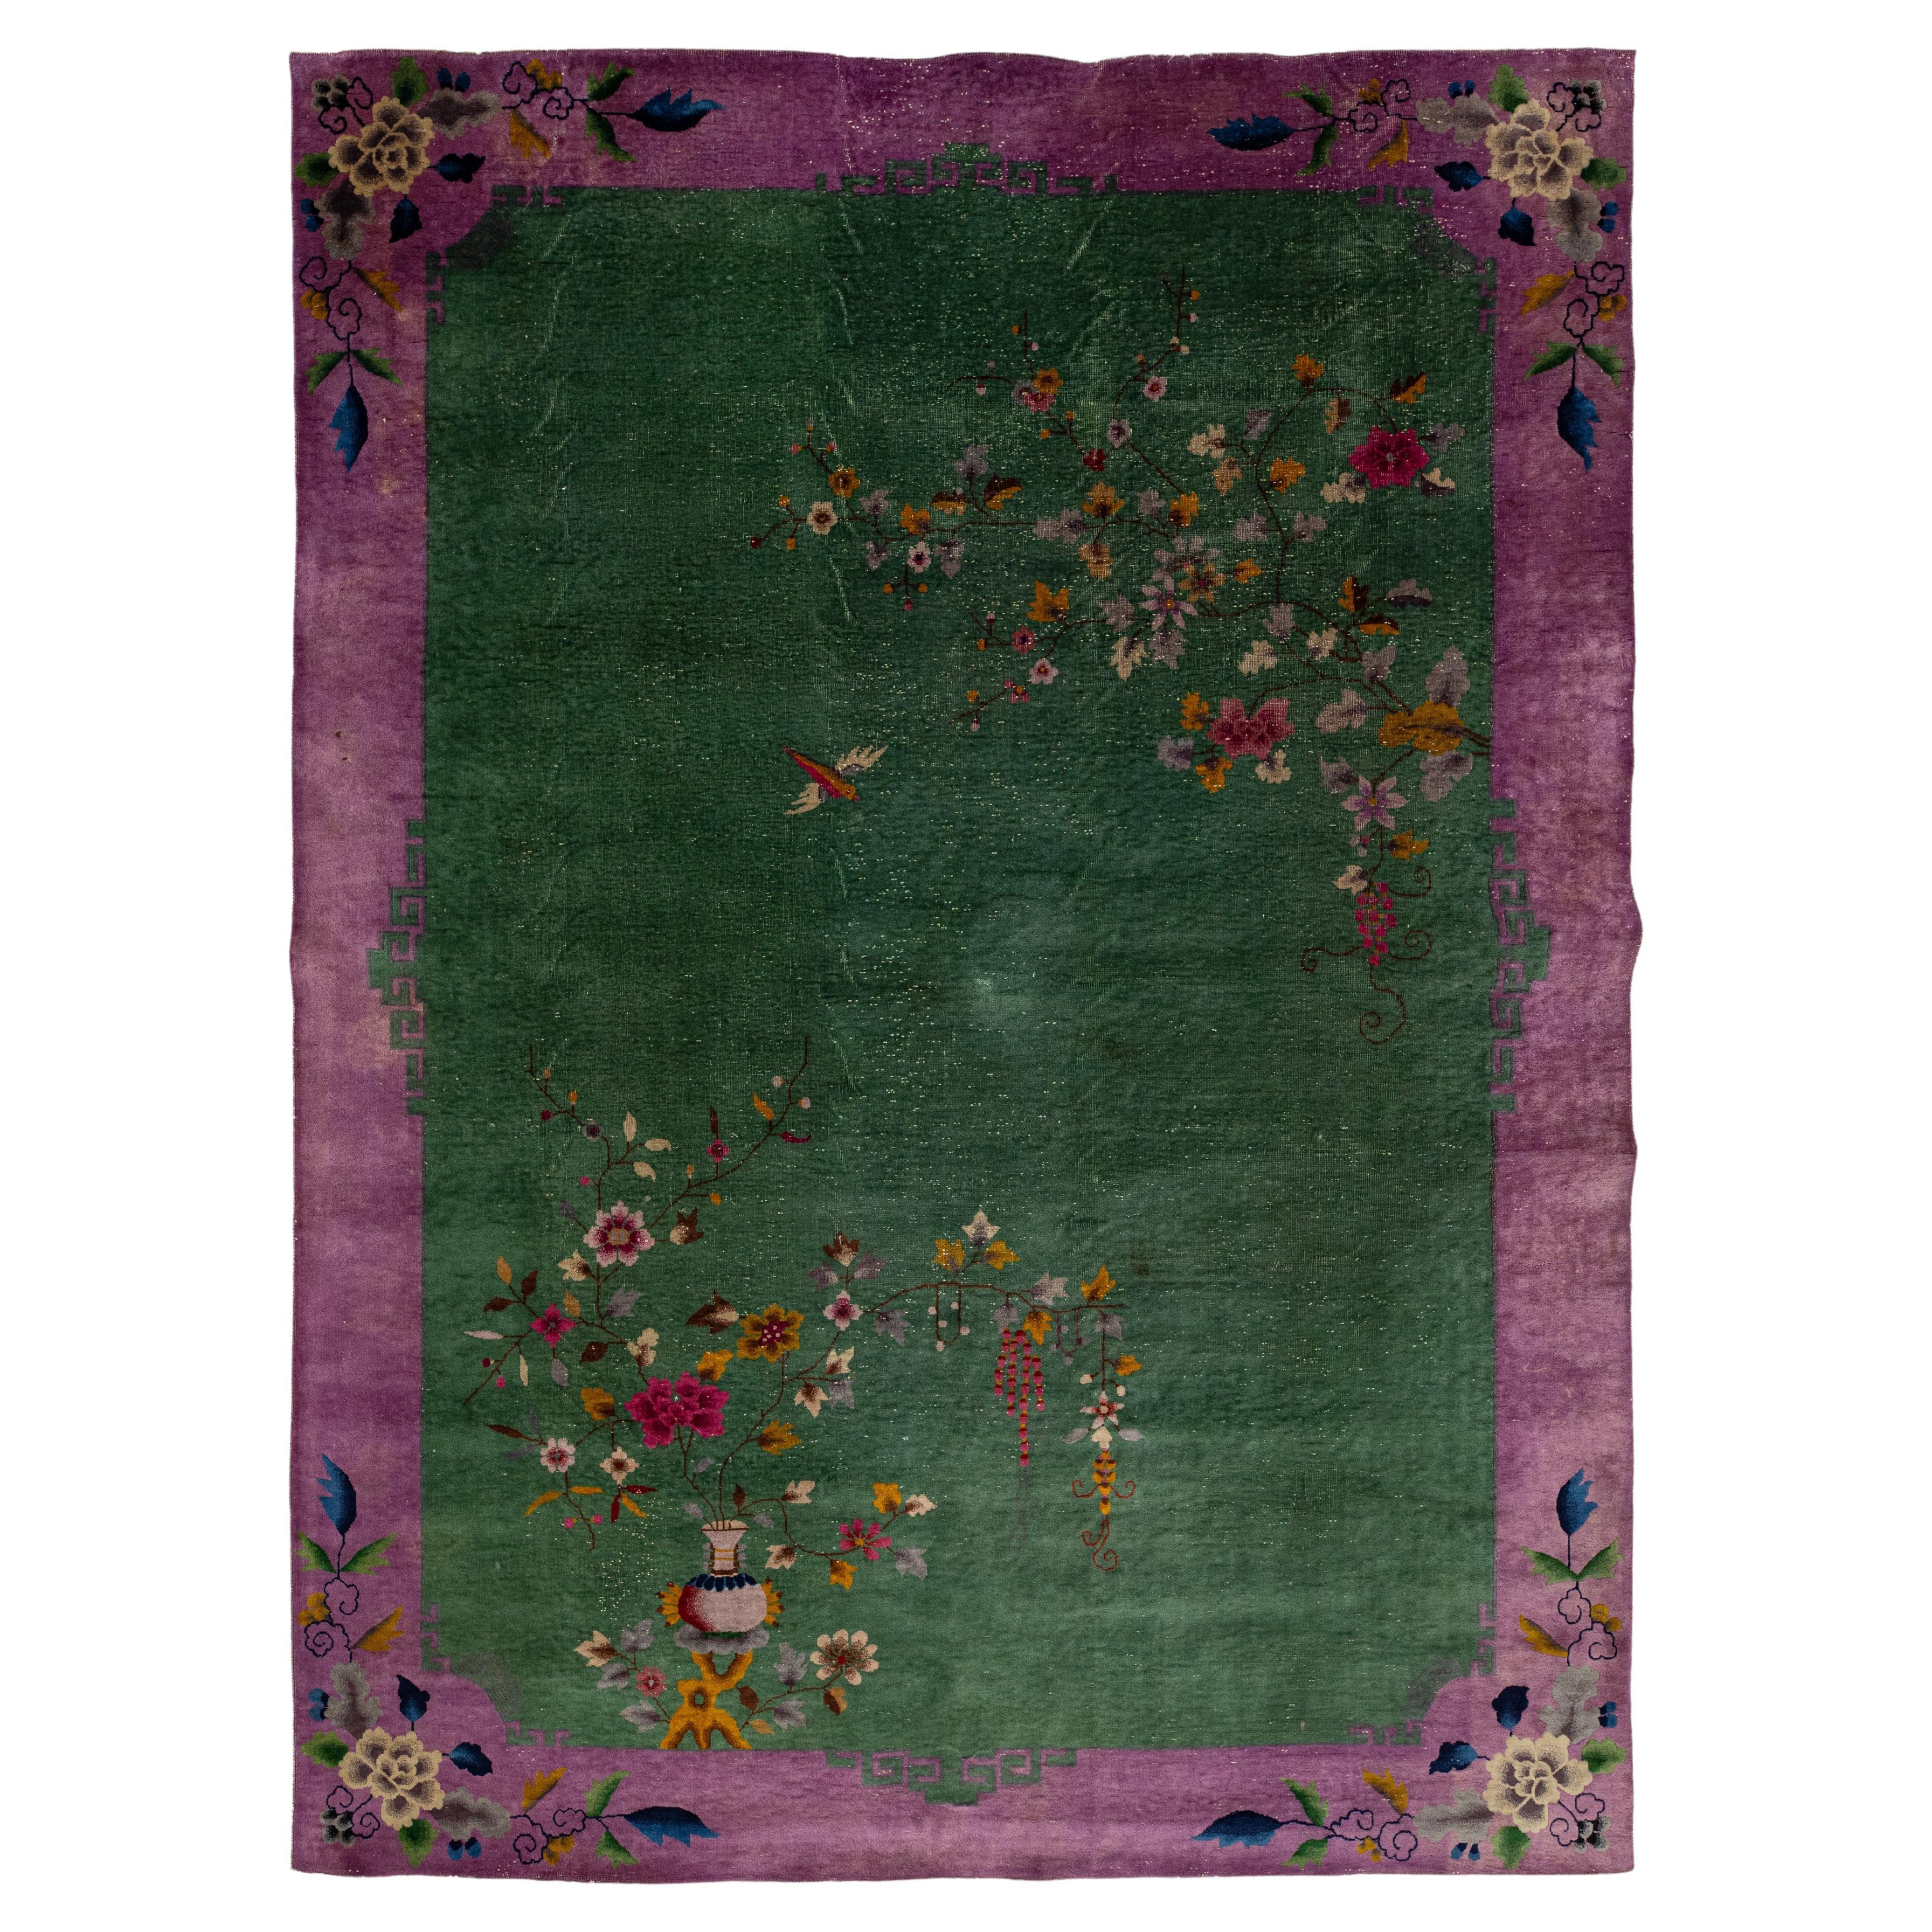 Green Chinese Art Deco Wool Rug Antique Handmade Designed With Floral Pattern  